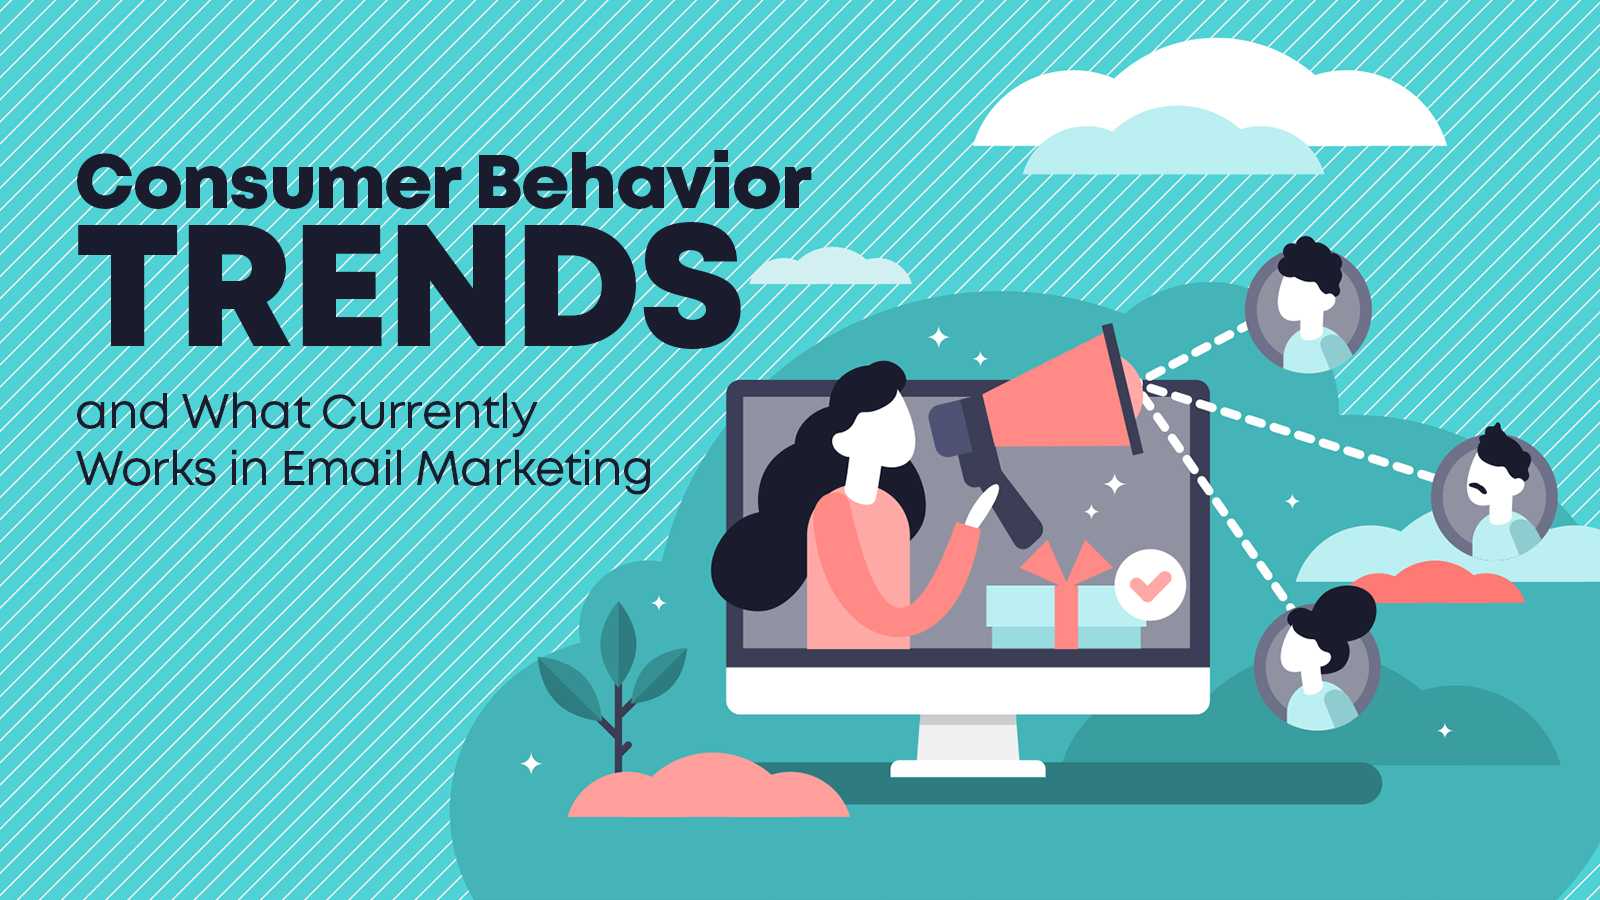 How current consumer behavior affects email marketing